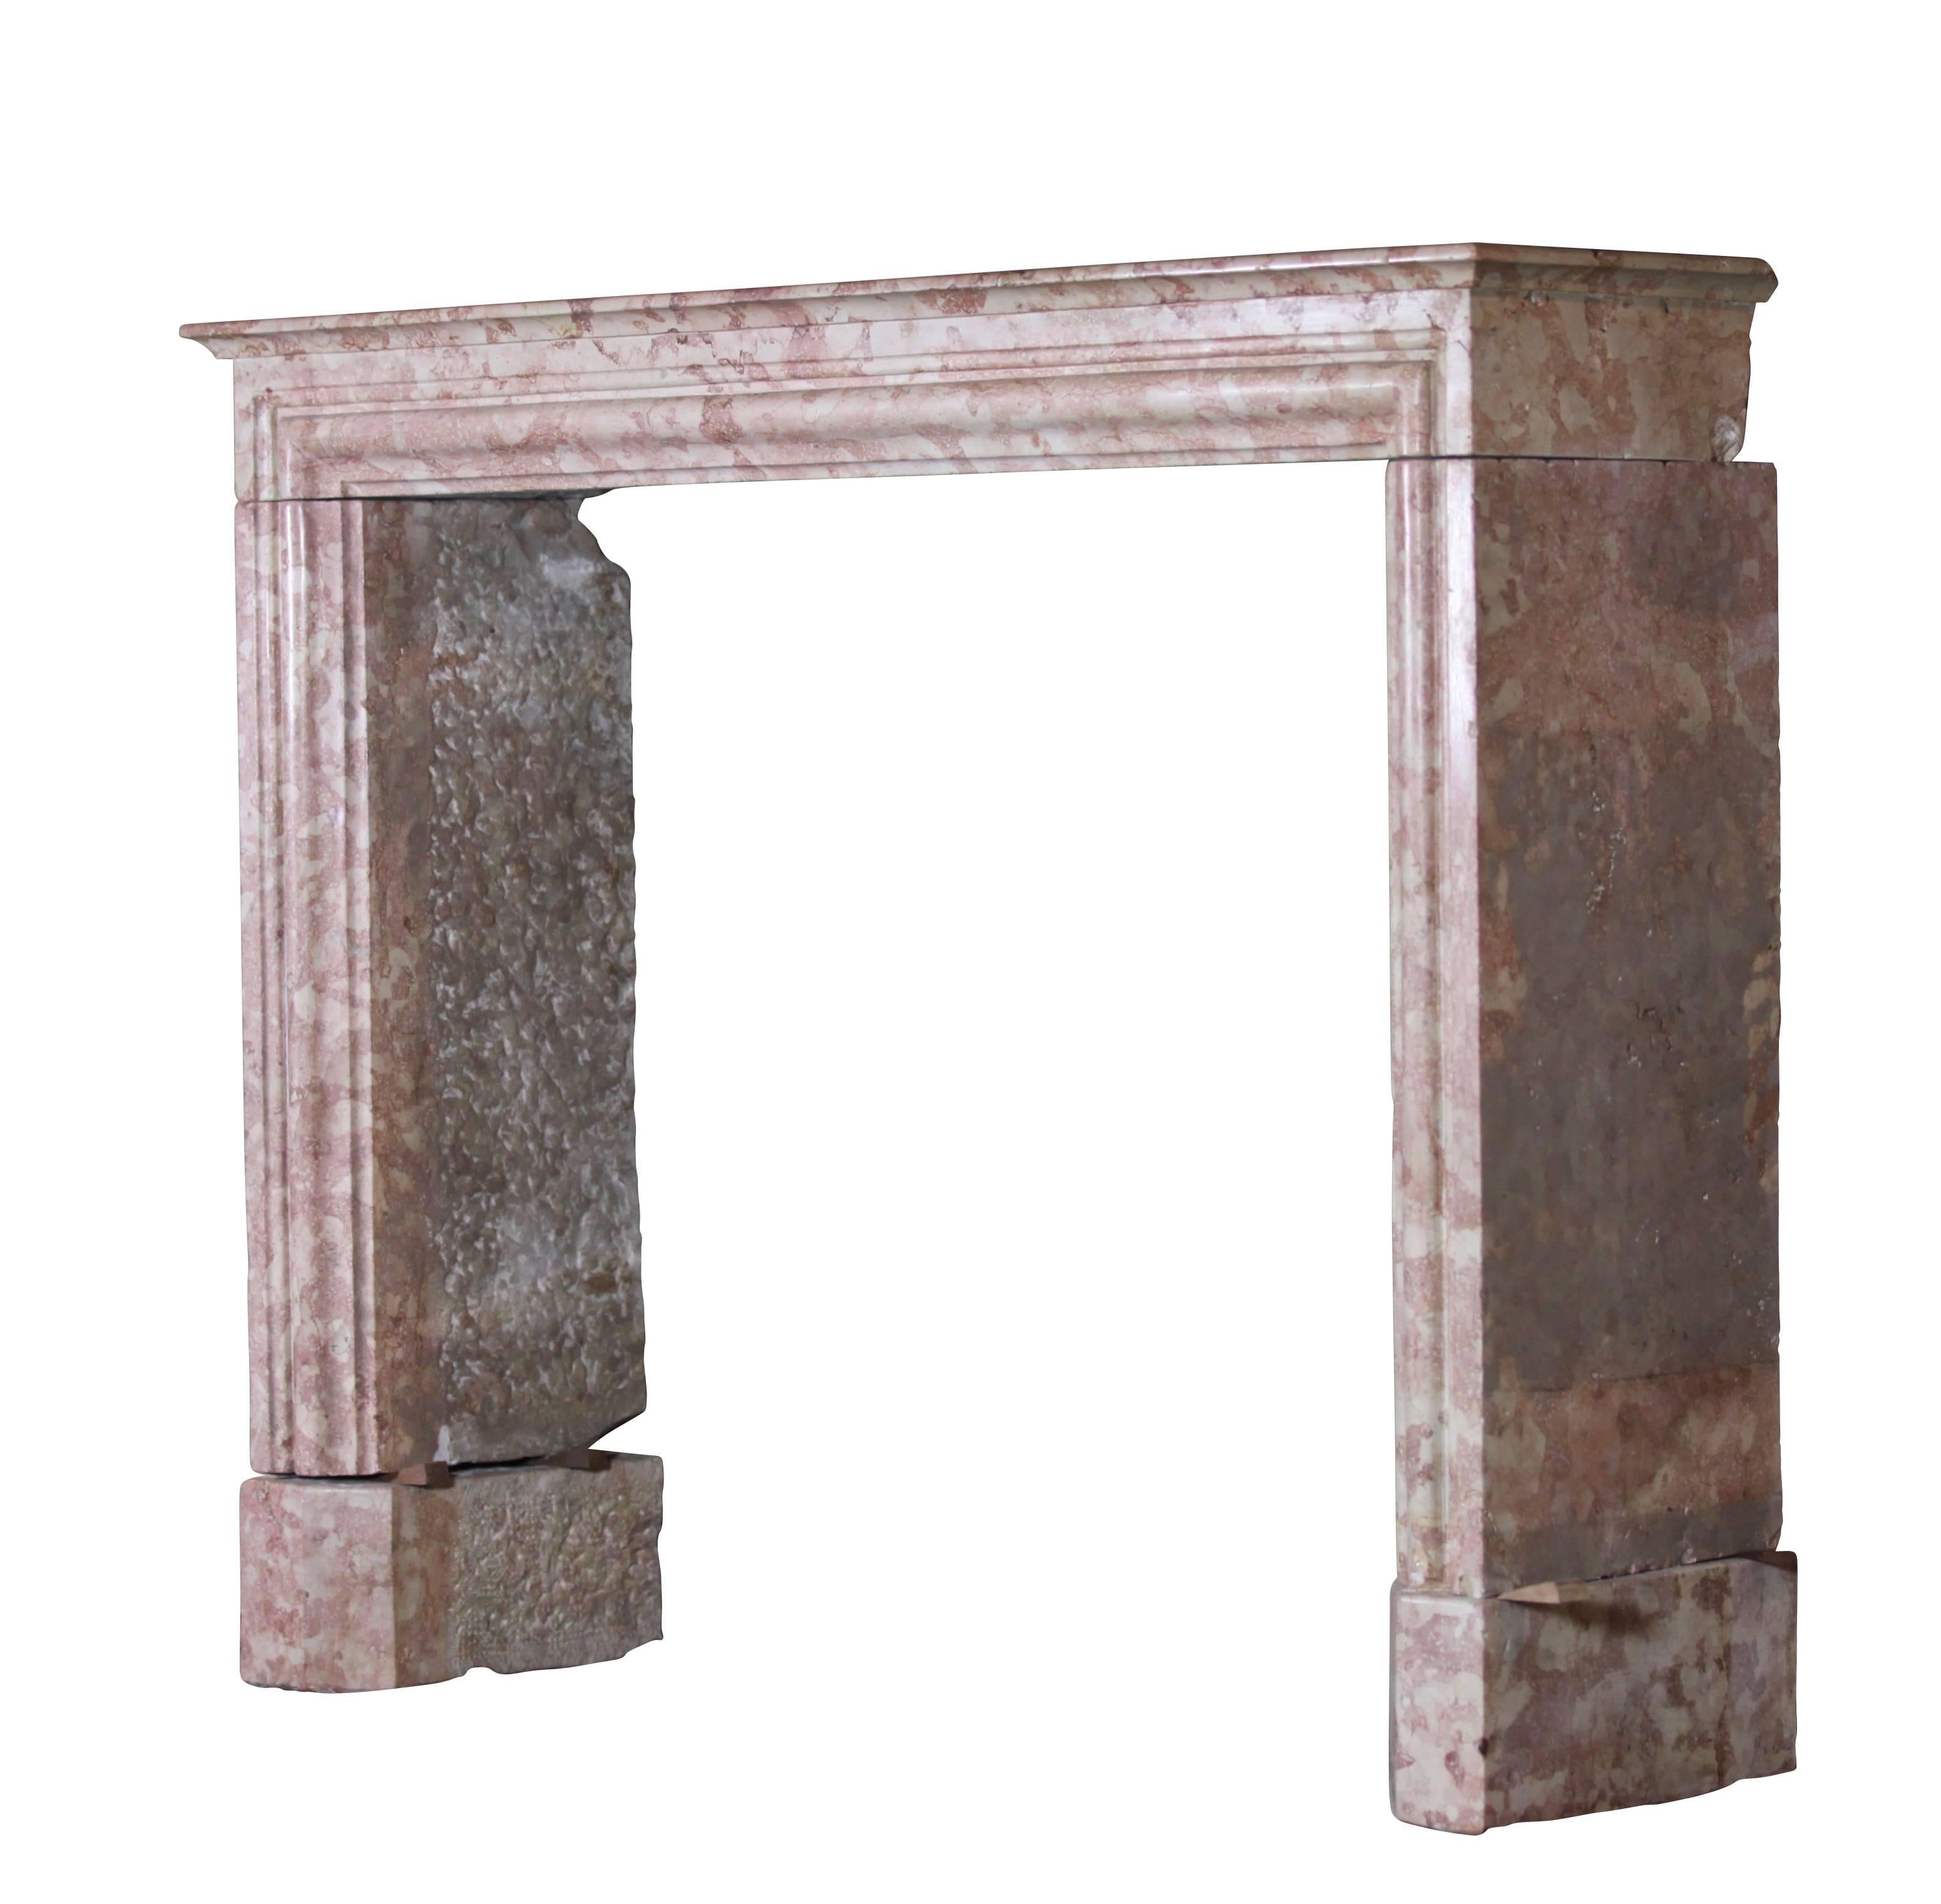 This is an antique fireplace surround from the south of the Burgundy region.
The marble was used in lots of historical landmarks.
Measures:
121 cm EW 47.63 Inch
100 cm EH 39.37 Inch
96 cm IW 37.79 Inch
87 cm IH 34.25 Inch
29 cm S 11.41 Inch
232 kg.
 